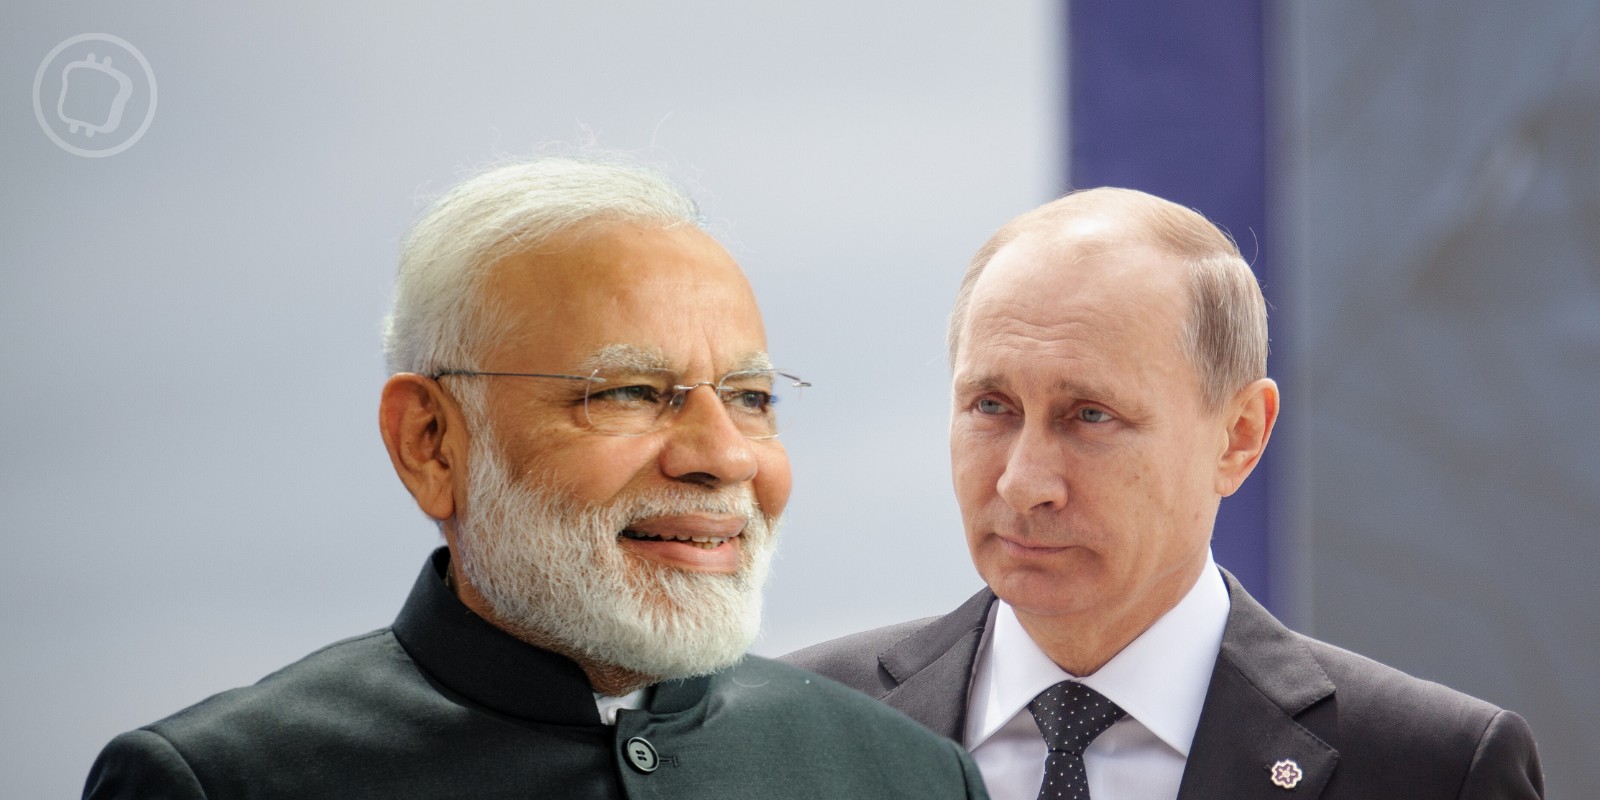 Russia and India are joining forces to create a “digital economy”.